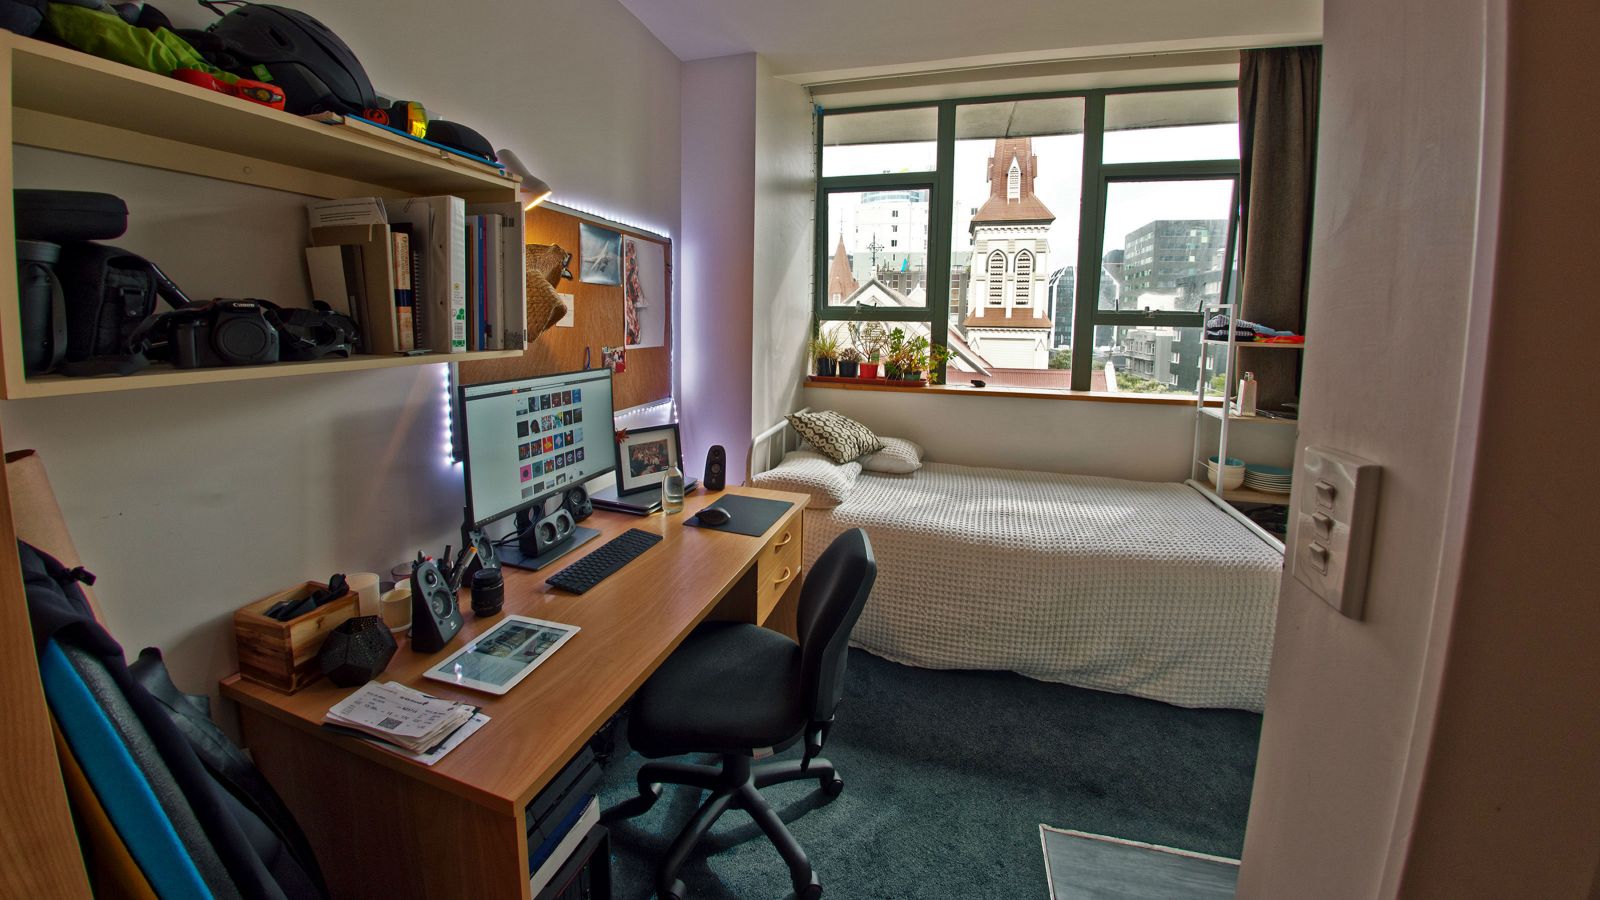 Single studio bedroom in Willis St – Education House. A room with a double bed, a desk and a book shelf. The view through the window overlooks the city.